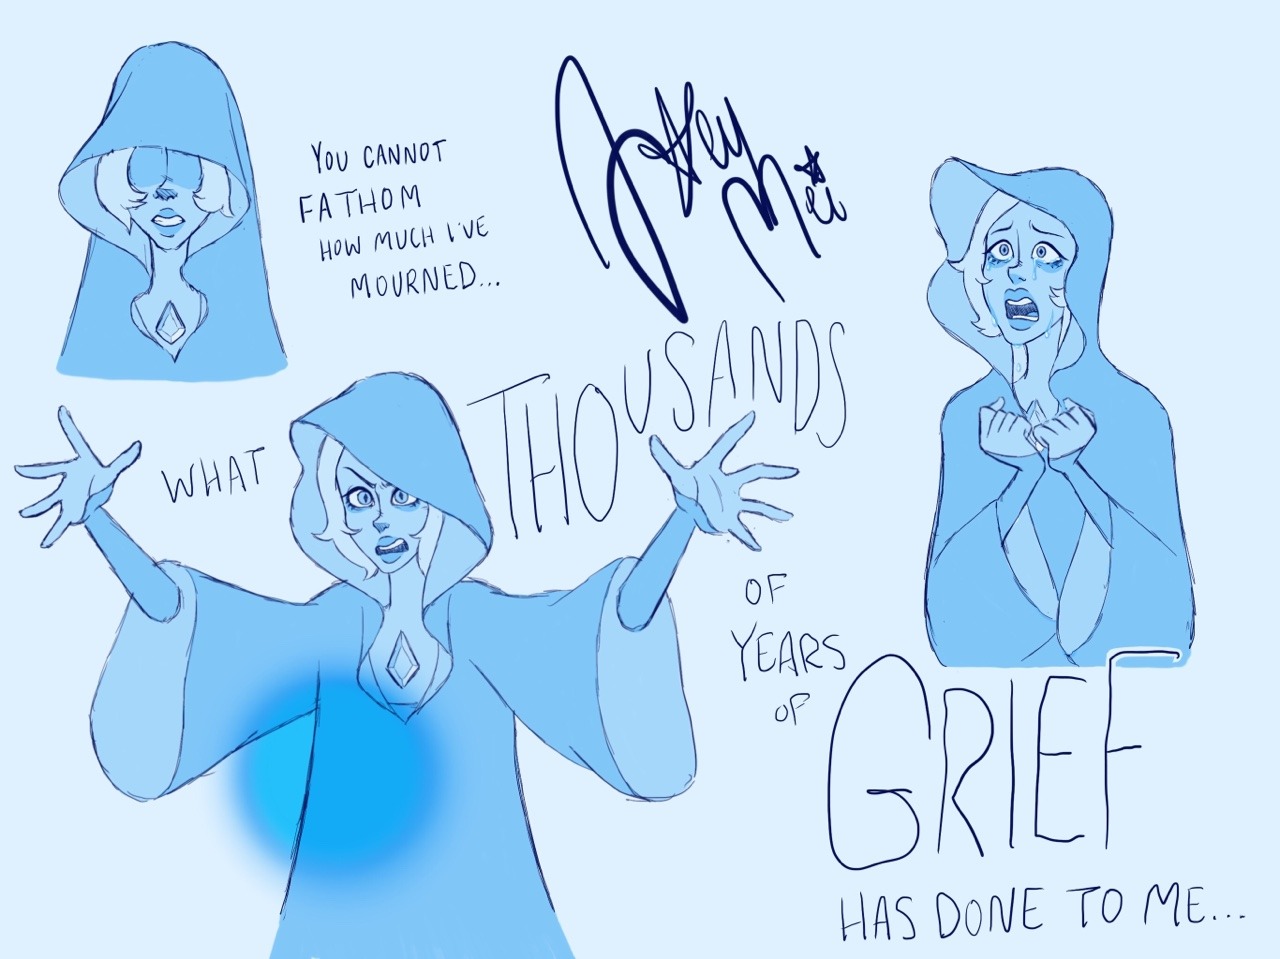 getting some practice by redrawing blue diamond from some scenes